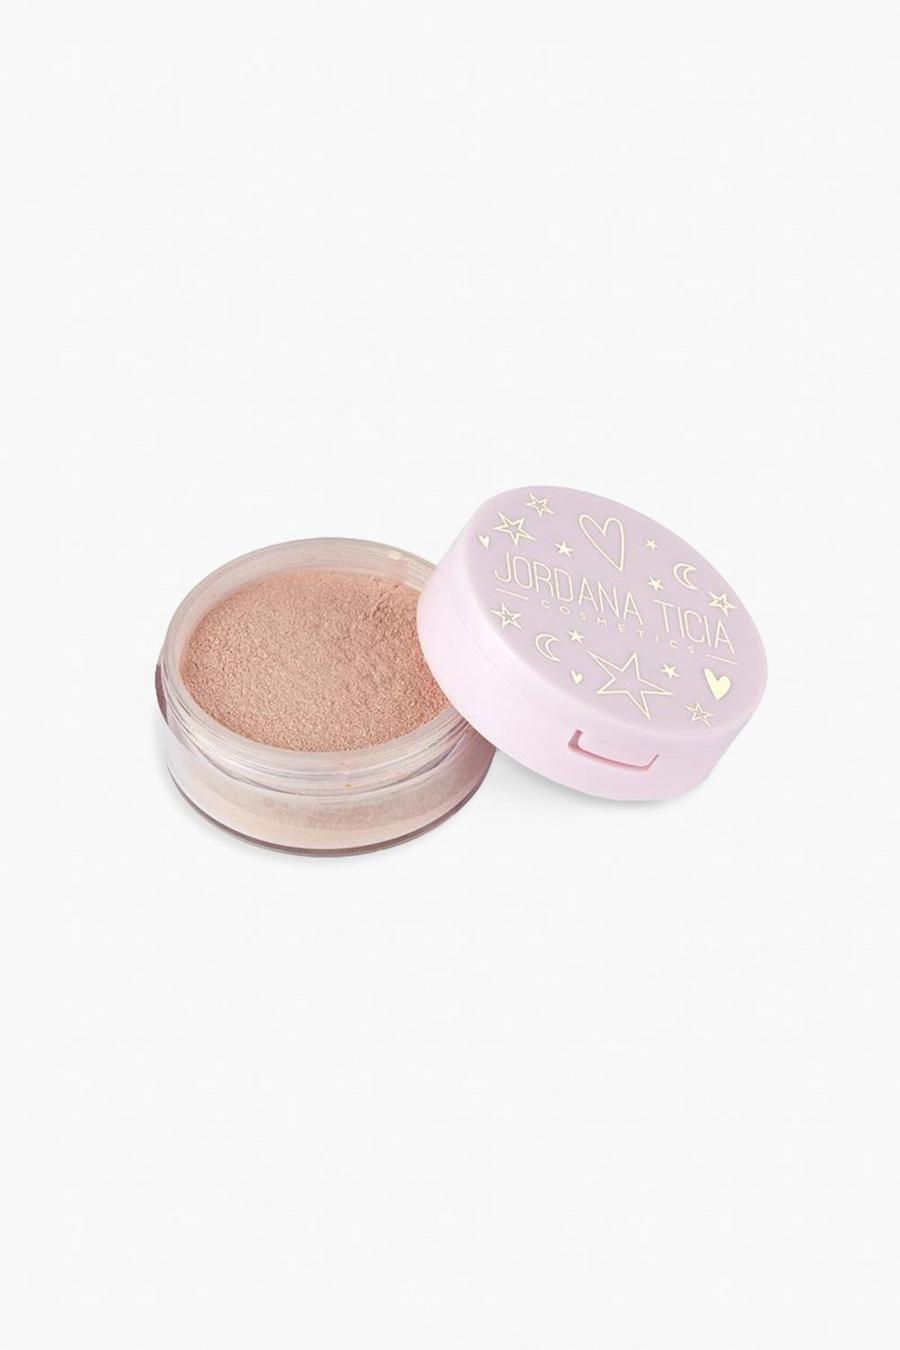 Jordana Ticia Highlighter - Rose Tinted, Champagne image number 1